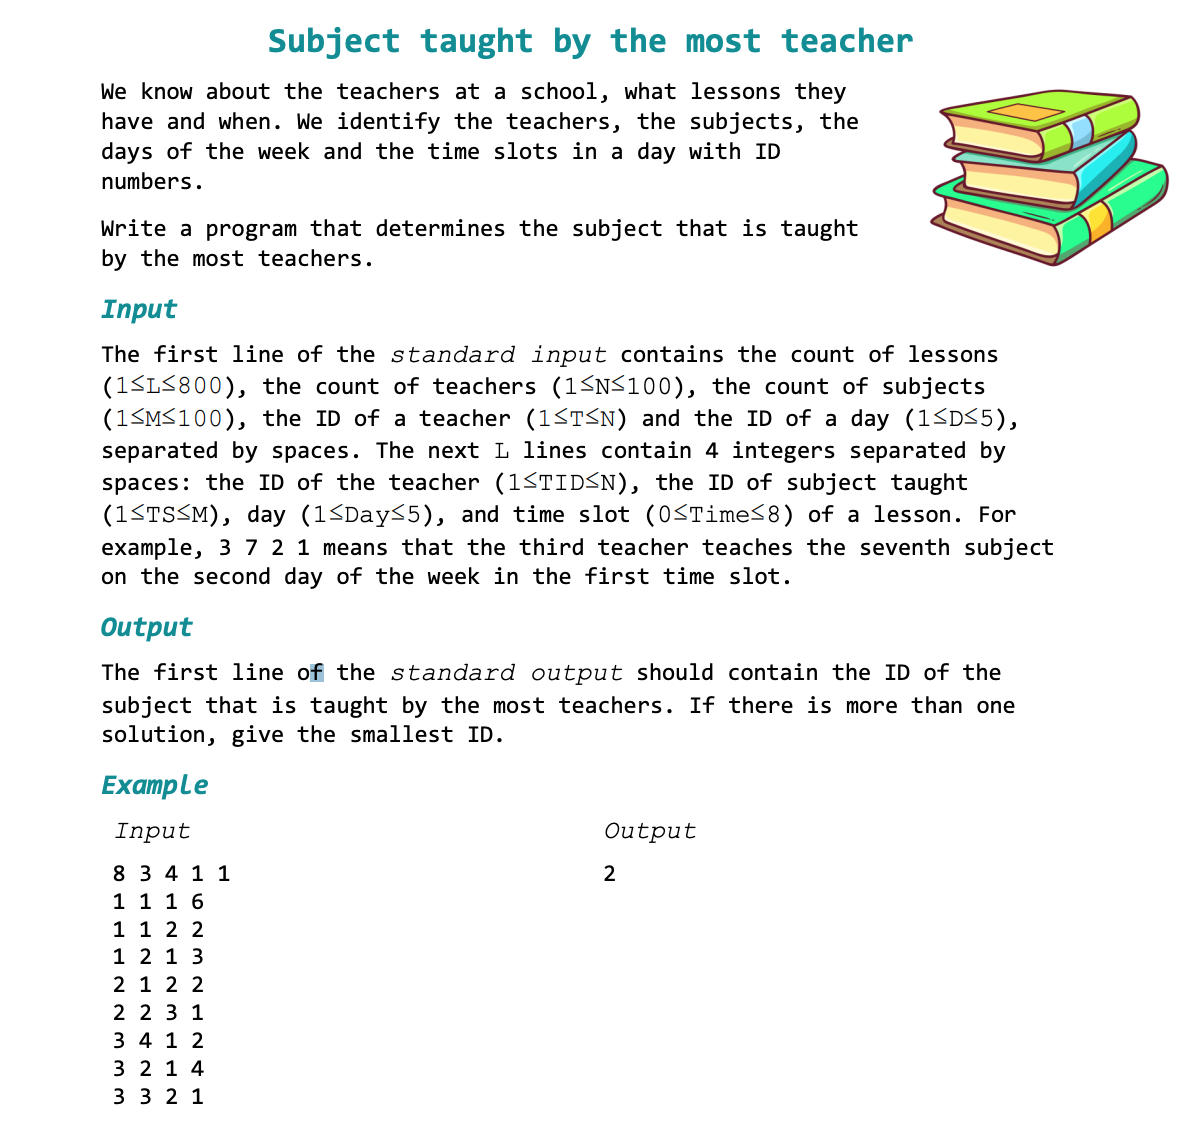 Subject taught by the most teacher
We know about the teachers at a school, what lessons they
have and when. We identify the teachers, the subjects, the
days of the week and the time slots in a day with ID
numbers.
Write a program that determines the subject that is taught
by the most teachers.
Input
The first line of the standard input contains the count of lessons
(1≤L≤800), the count of teachers (1≤N≤100), the count of subjects
(1≤M≤100), the ID of a teacher (1≤T≤N) and the ID of a day (1≤D≤5),
separated by spaces. The next L lines contain 4 integers separated by
spaces: the ID of the teacher (1≤TID≤N), the ID of subject taught
(1≤TS≤M), day (1≤Day≤5), and time slot (0≤Time≤8) of a lesson. For
example, 3 7 2 1 means that the third teacher teaches the seventh subject
on the second day of the week in the first time slot.
Output
The first line of the standard output should contain the ID of the
subject that is taught by the most teachers. If there is more than one
solution, give the smallest ID.
Example
Input
8 3 4 1 1
1 1 1 6
1 1 2 2
1 2 1 3
2 1 2 2
2 2 3 1
3 4 1 2
3 2 1 4
3 3 2 1
Output
2